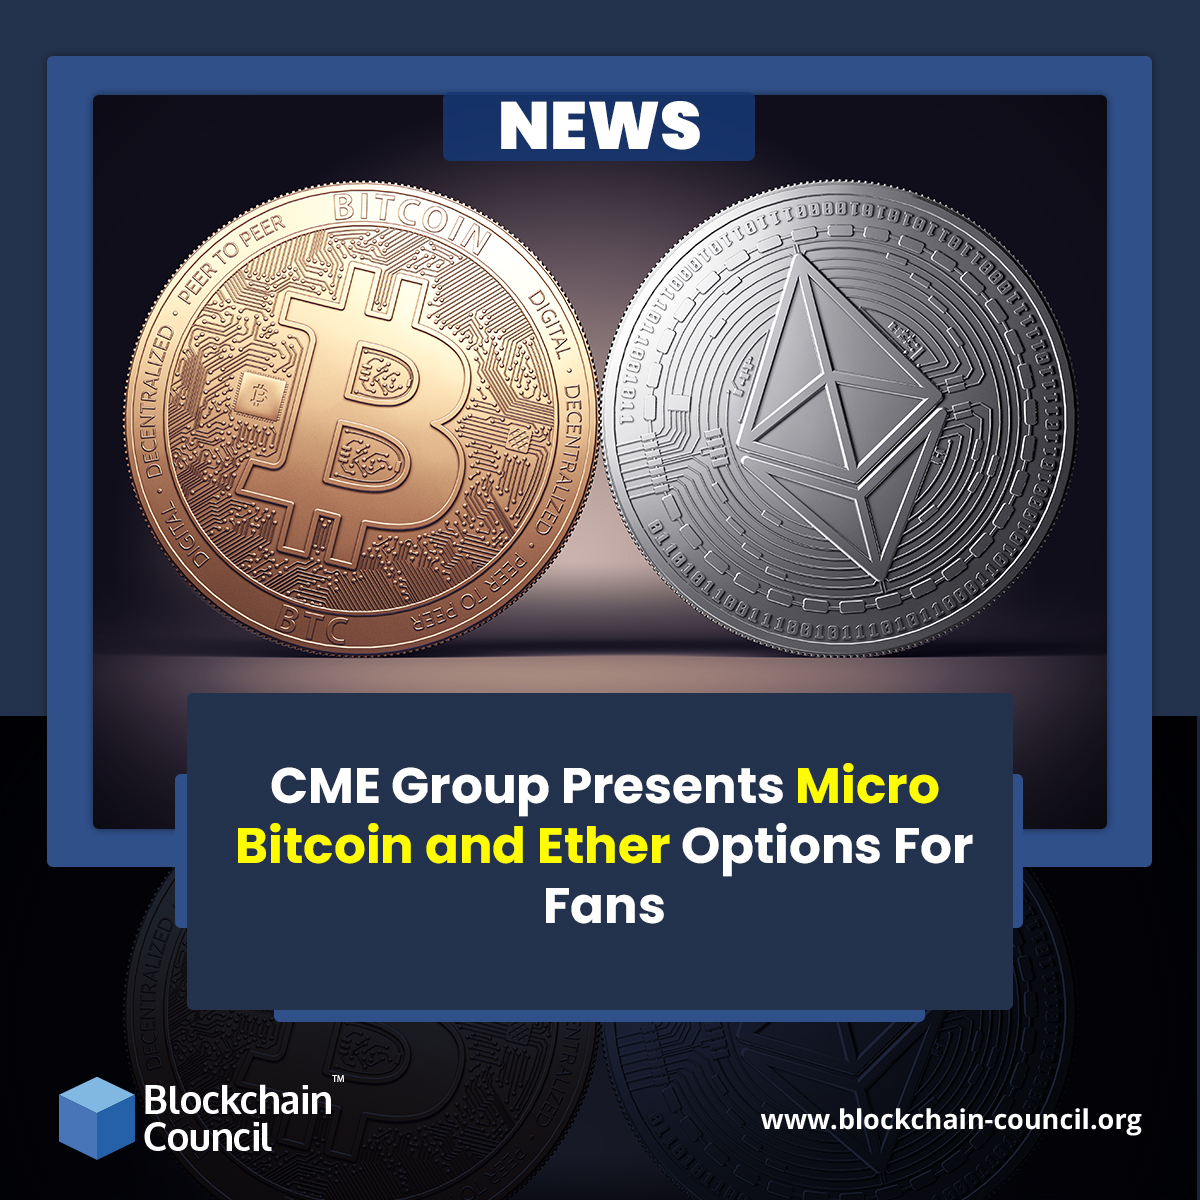 CME Group Presents Micro Bitcoin and Ether Options For Fans